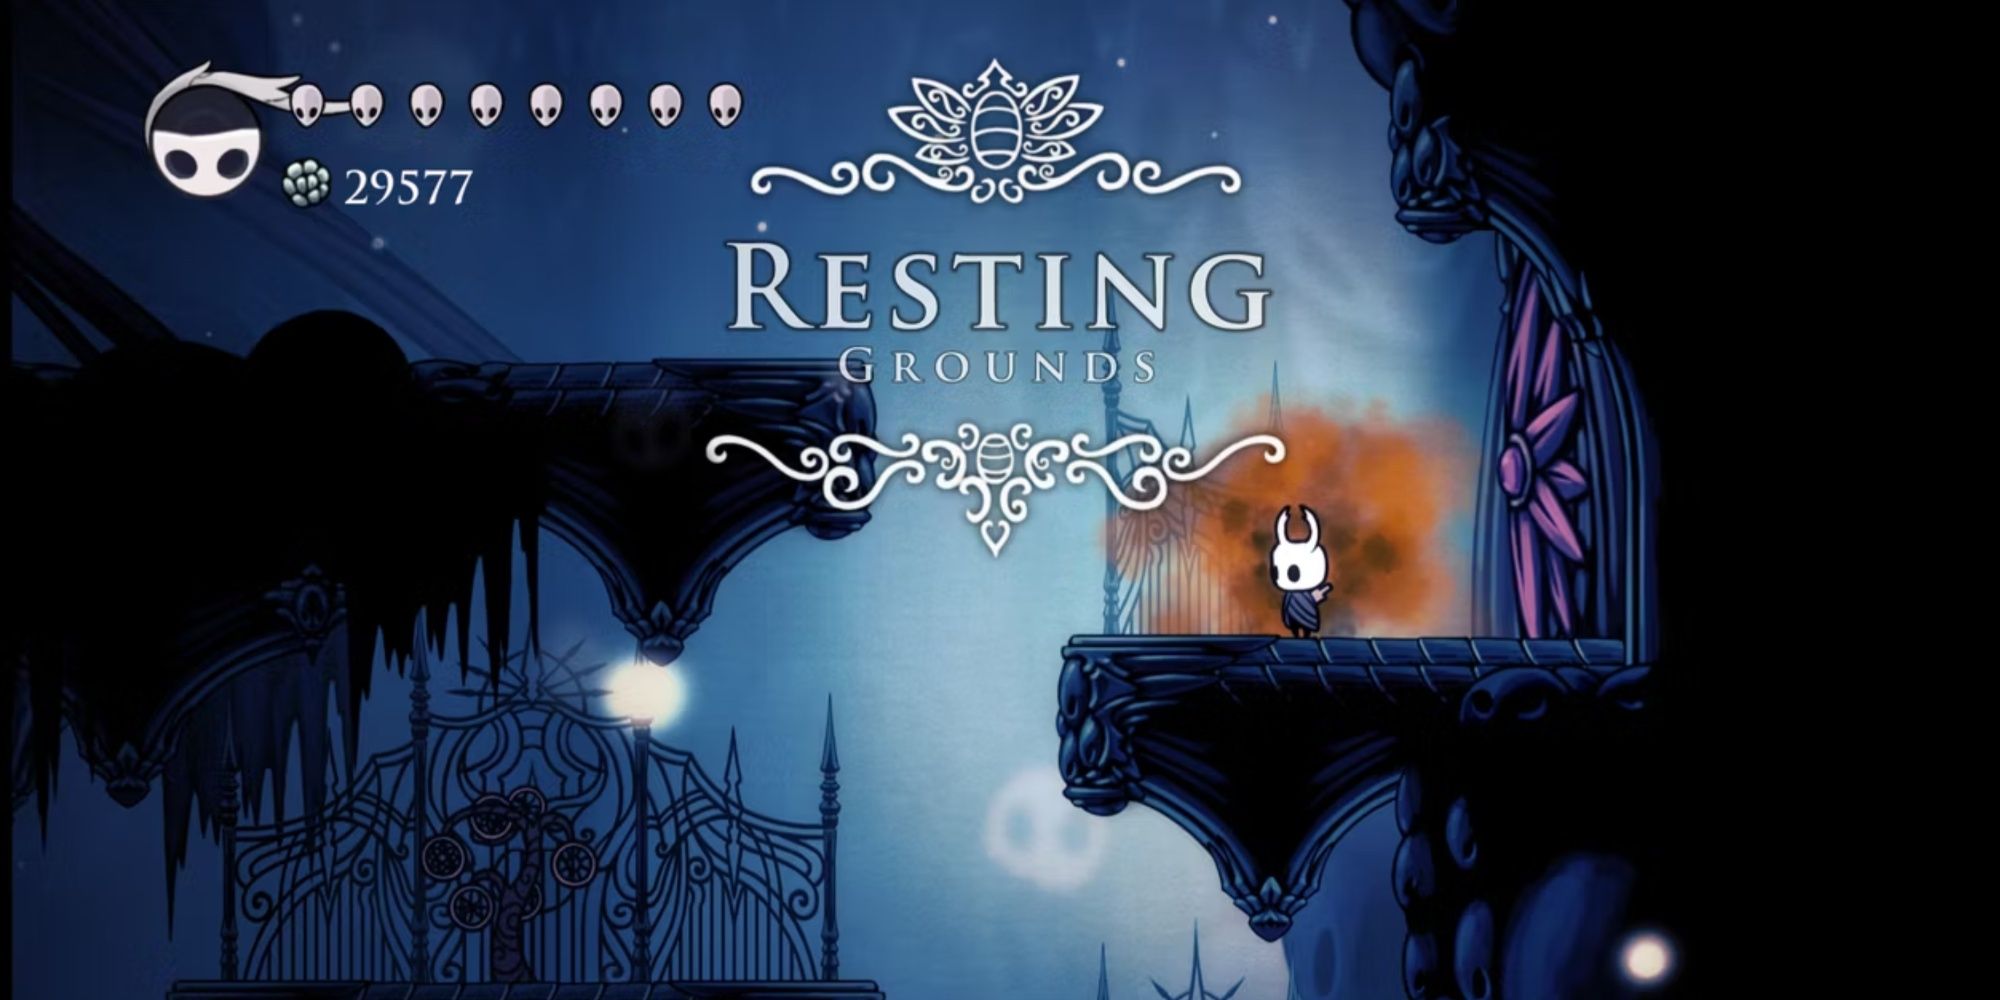 The Knight in the Resting Grounds in Hollow Knight